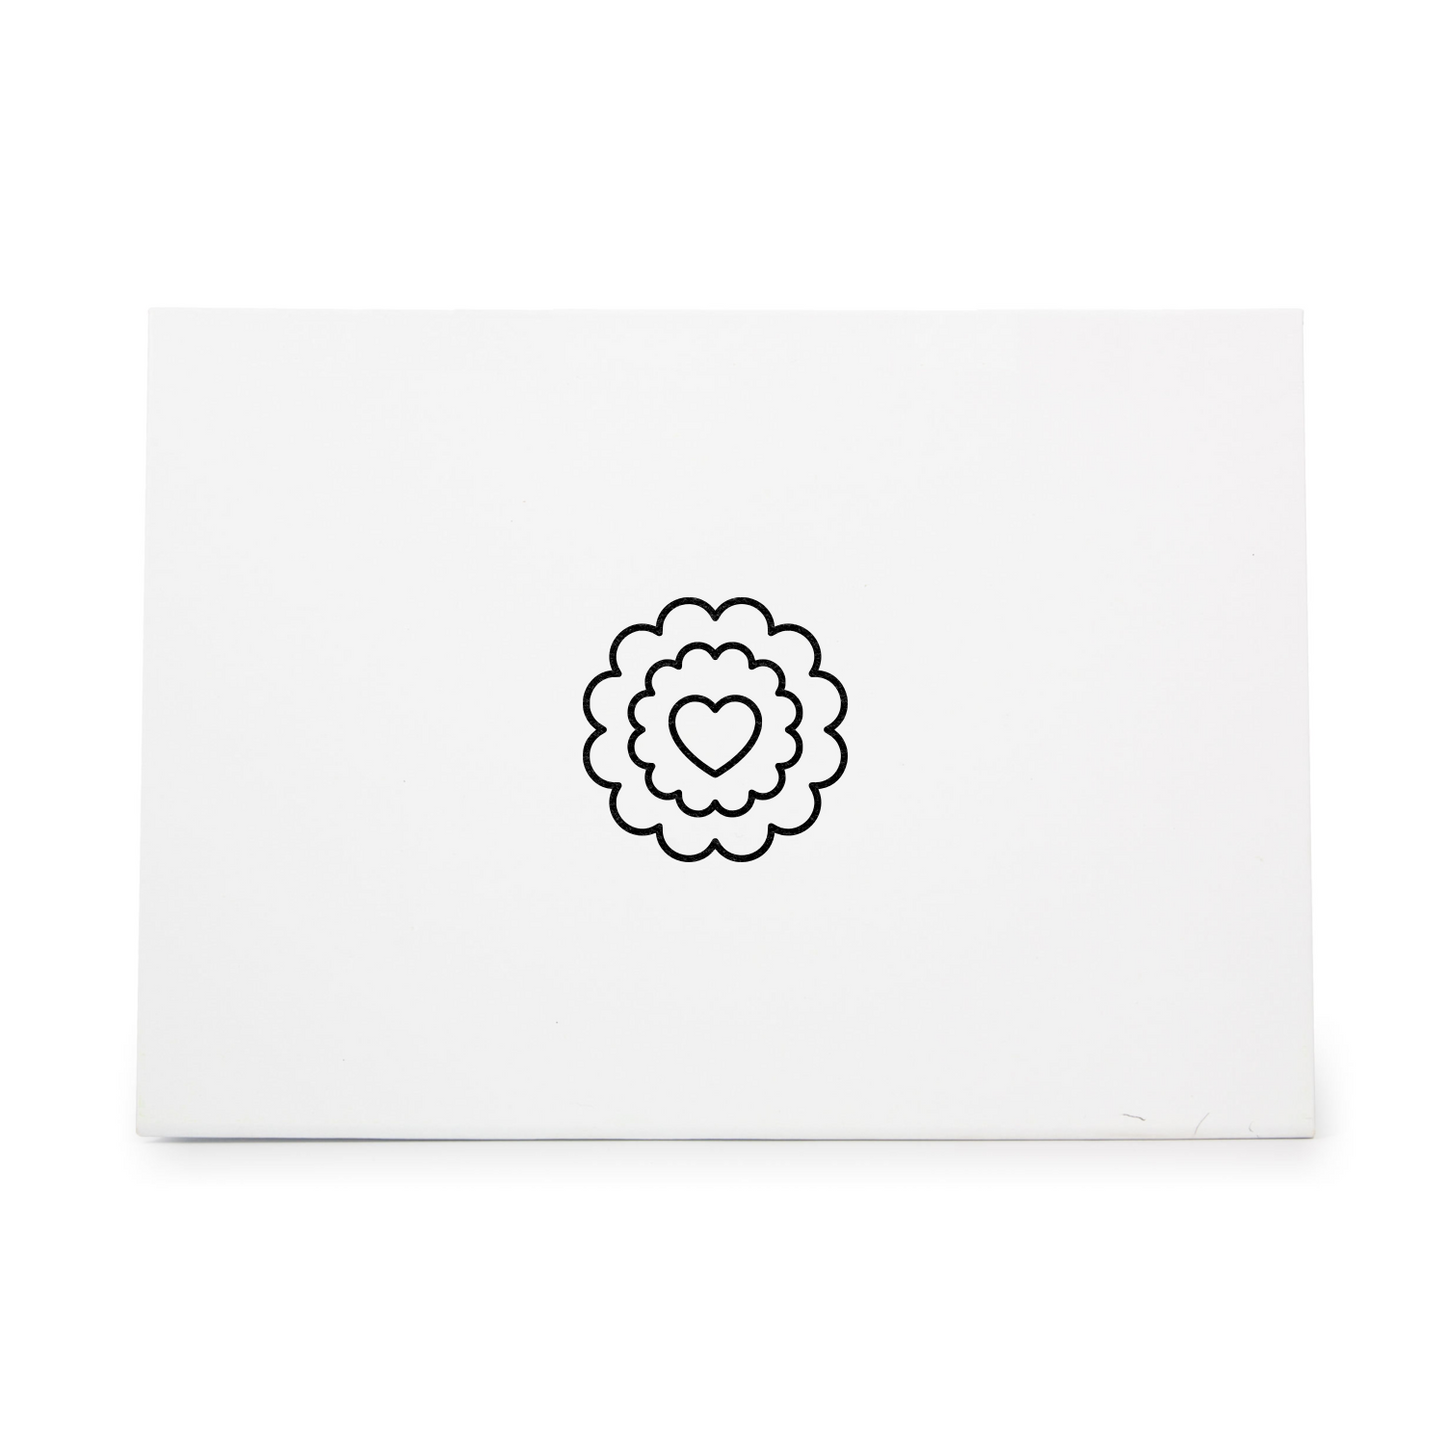 Flower With A Heart In The Center Rubber Stamp CCSTA-9640